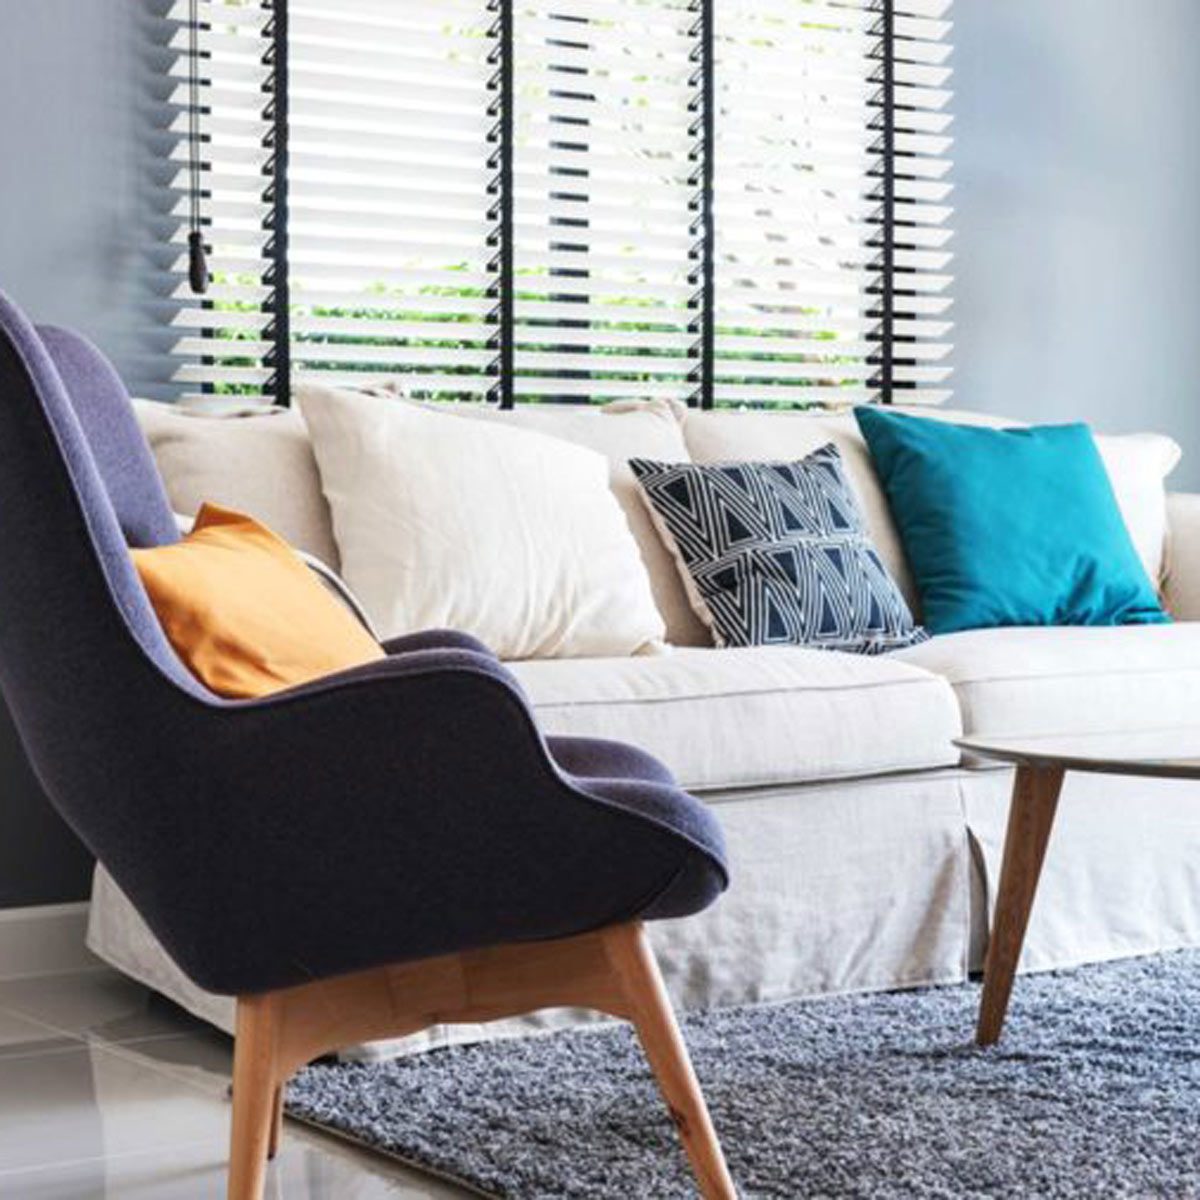 10 Budget-friendly Home Decor Ideas You Should Know - The European Business  Review